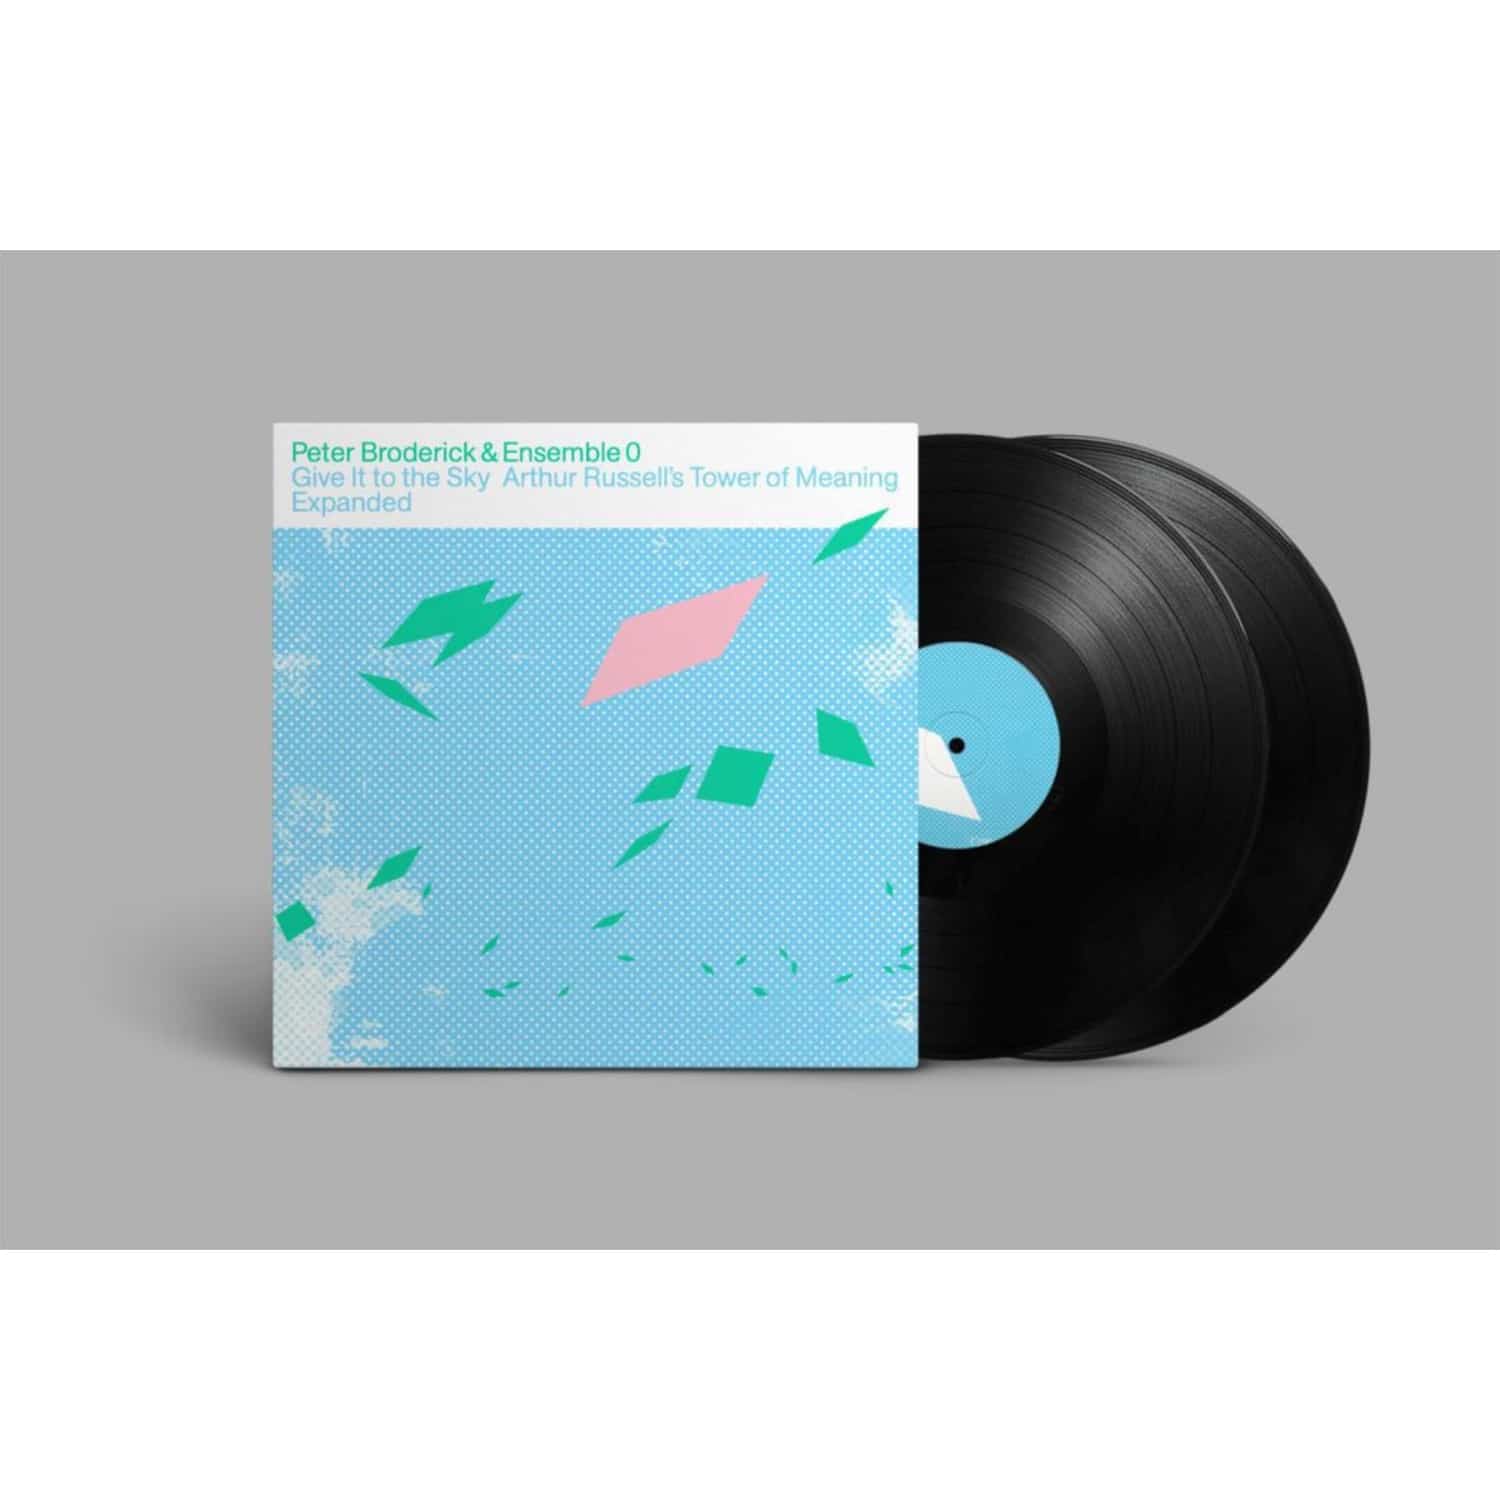 Peter Broderick / Ensemble 0 - GIVE IT TO THE SKY: ARTHUR RUSSELLS TOWER OF MEANING EXPANDED 